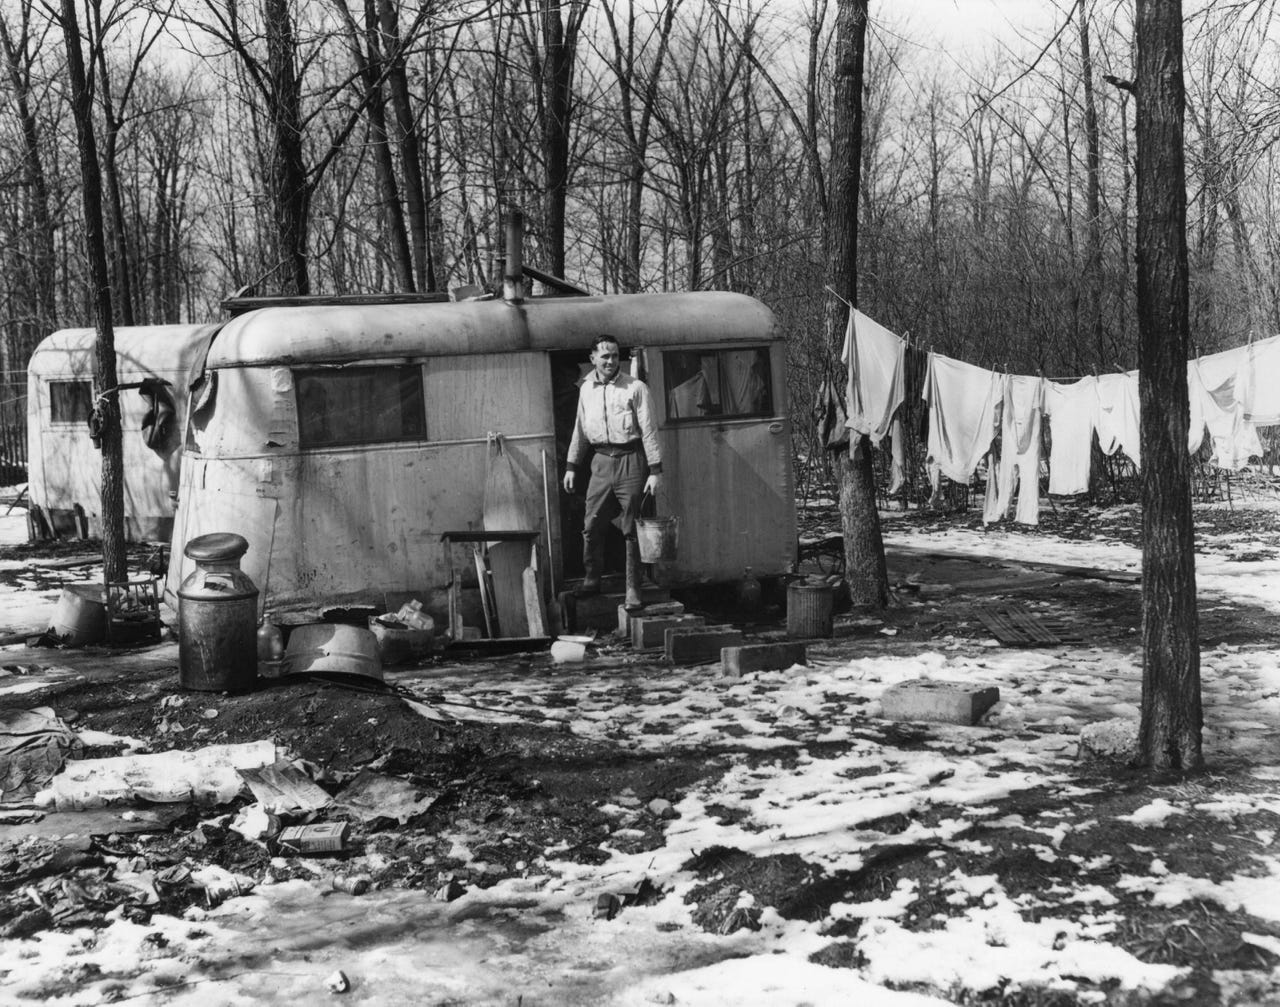 Ford Motor National Defense housing at the Willow Run Plant during the winter of 1943. Many employees were housed at Willow Run in huge government-built temporary dormitory-style housing for 14,000 workers. Others lived in tents, garages and trailers. There were angry calls for more permanent housing.